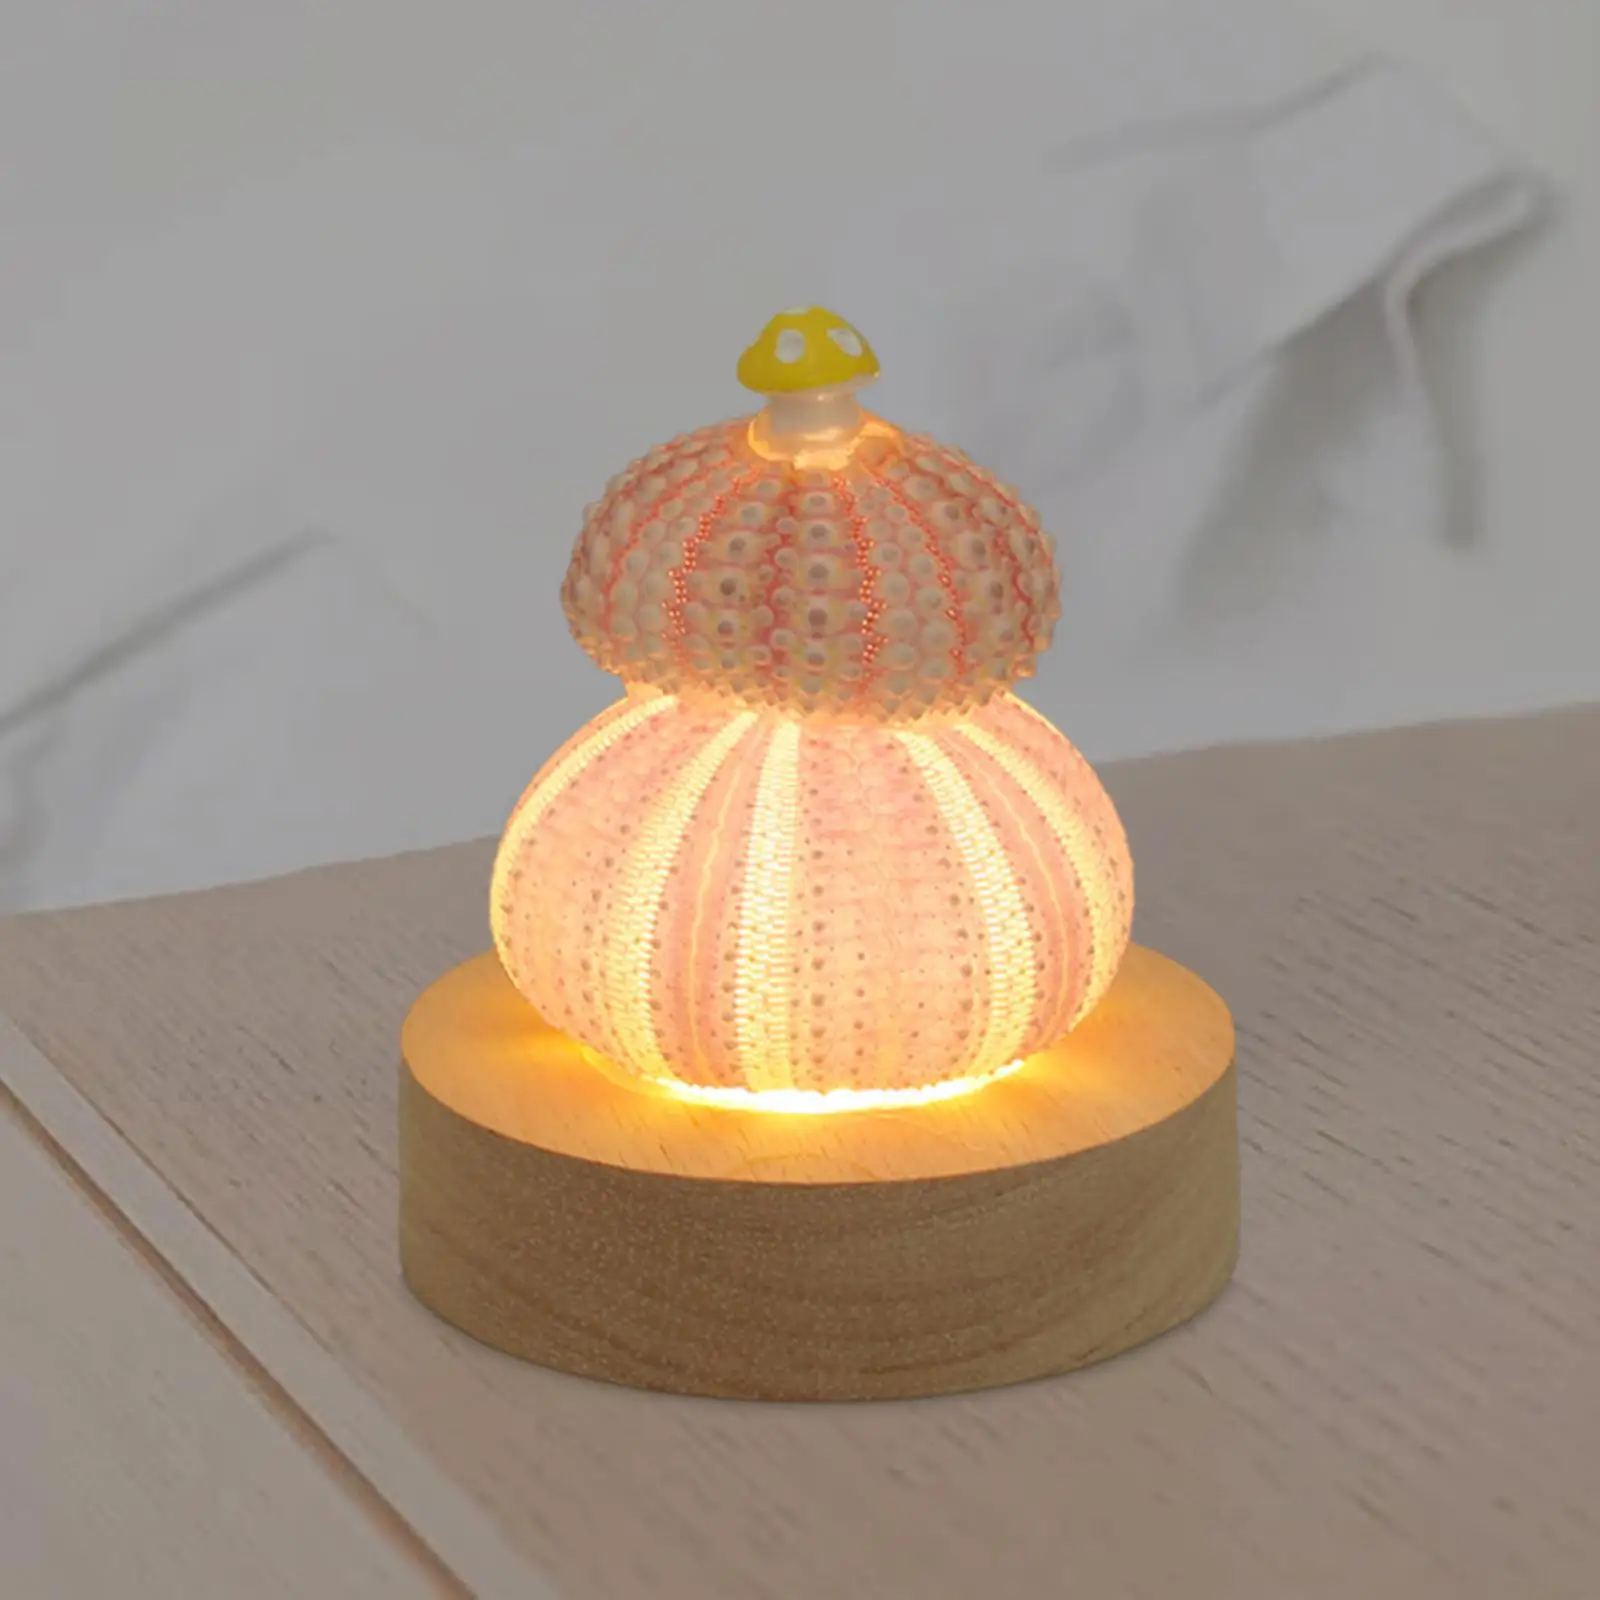 Decorative Table Lights Mini Desk Lamp Shell NightStand Bedside Lamp Wooden Base Party Desktop Birthday Gift Novelty Table Lamp